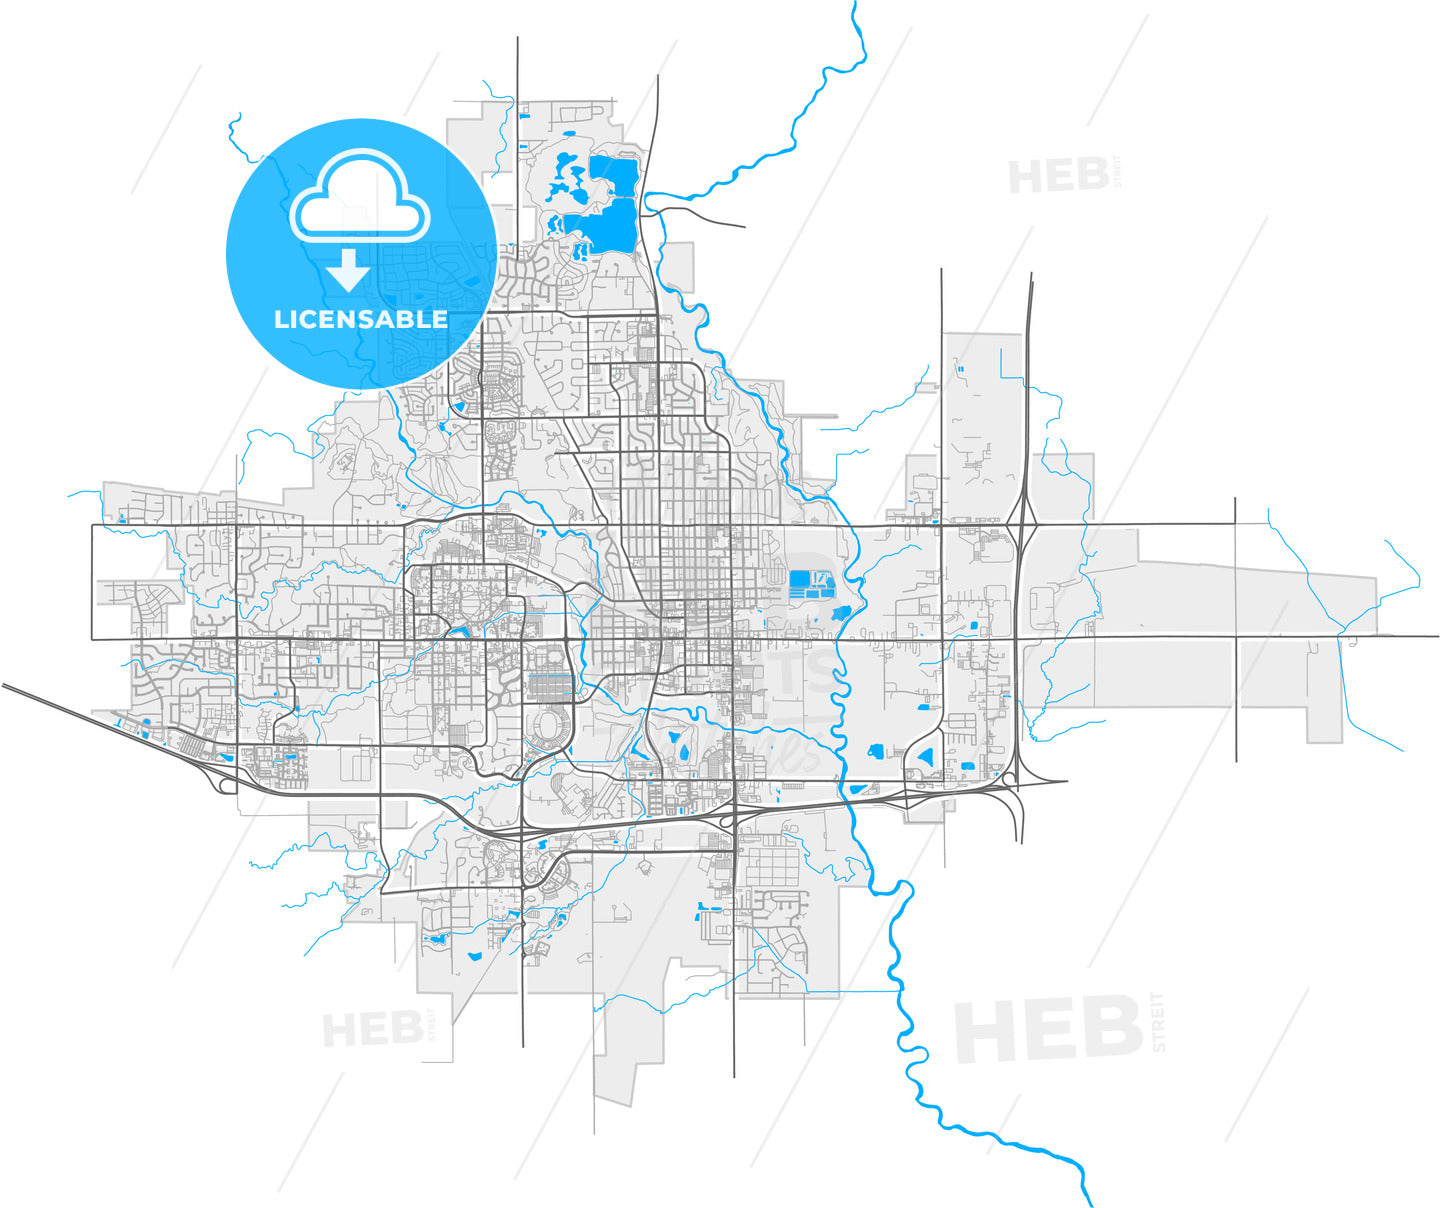 Ames, Iowa, United States, high quality vector map